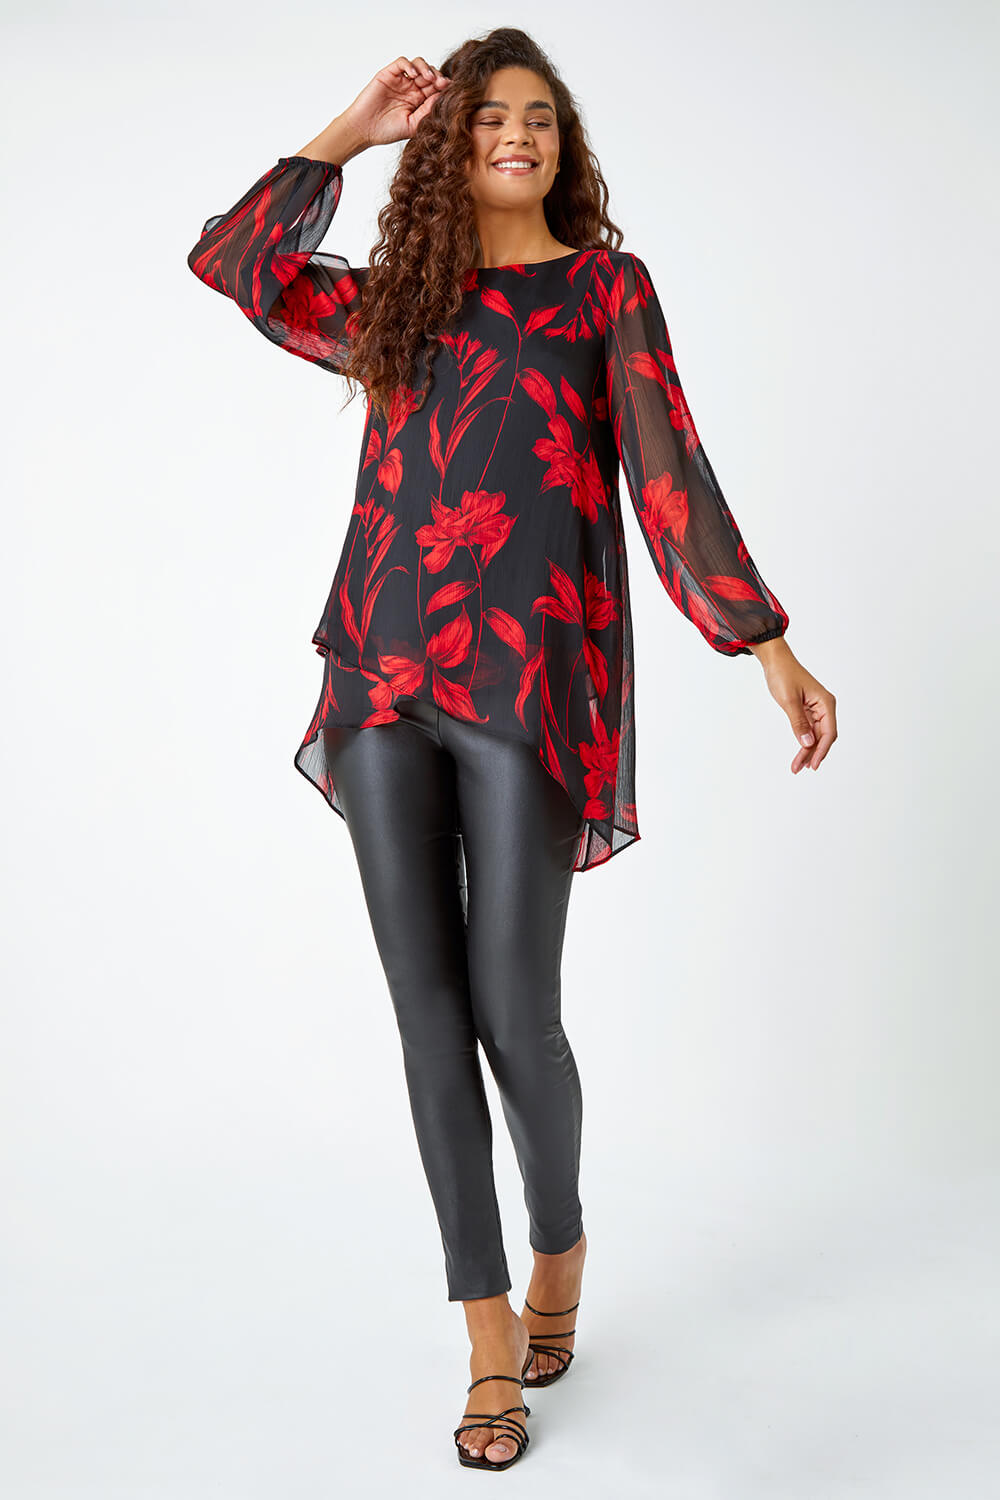 Red Floral Chiffon Layered Tunic Top, Image 2 of 5